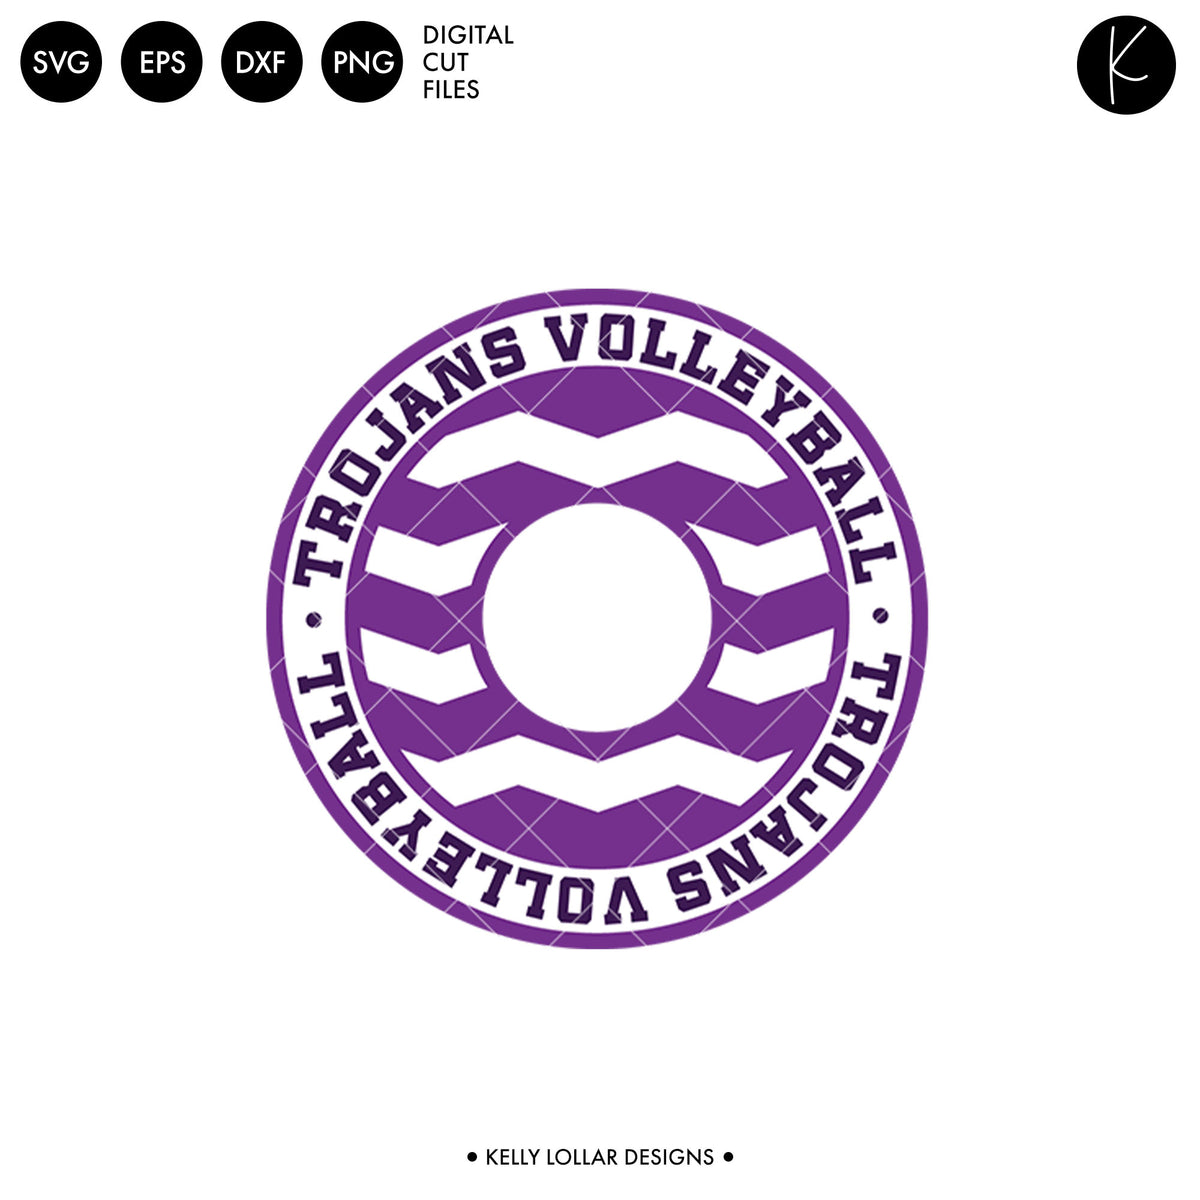 Trojans Volleyball Bundle | SVG DXF EPS PNG Cut Files